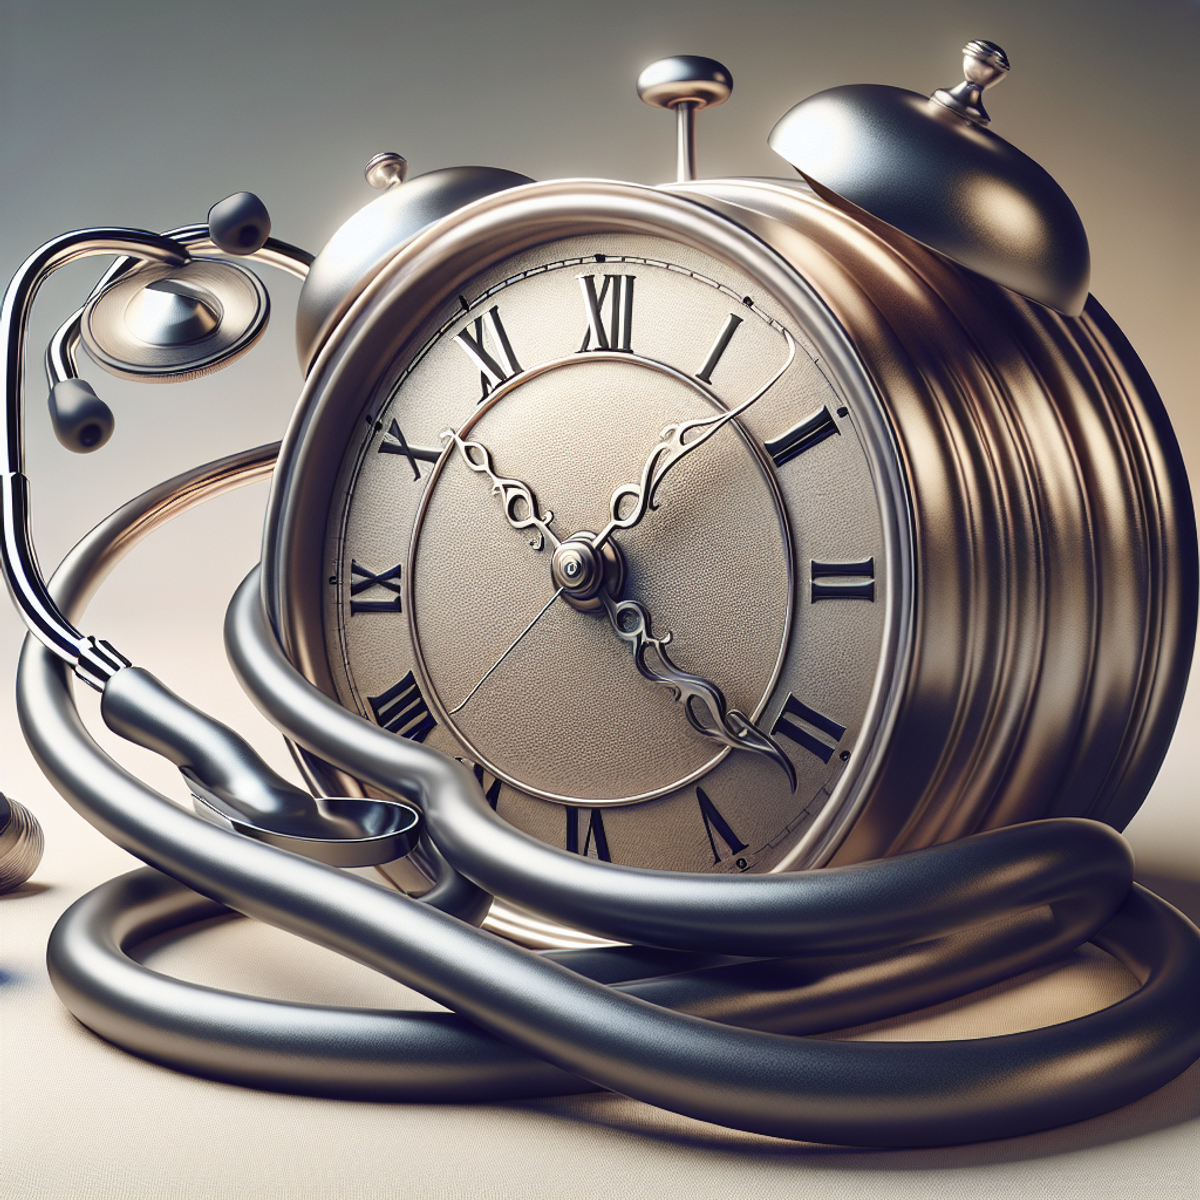 A stethoscope and antique clock symbolizing urgency in healthcare.